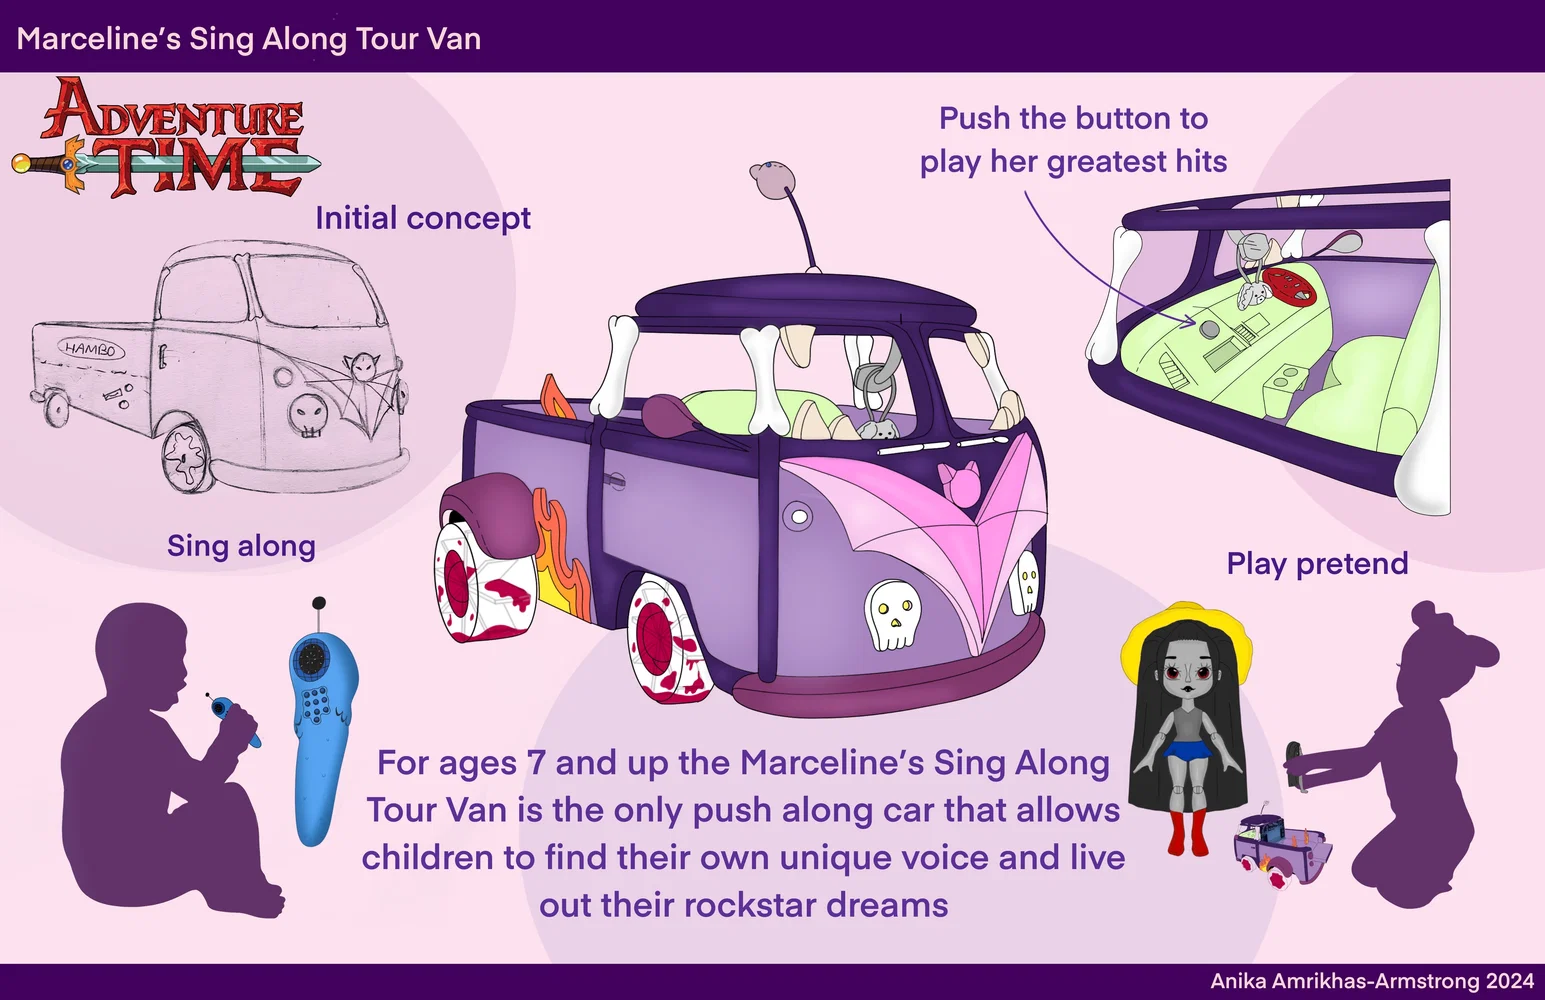 Marceline's Sing Along Tour Van is an original car concept that was made, inspired by the hit show 'Adventure Time'.